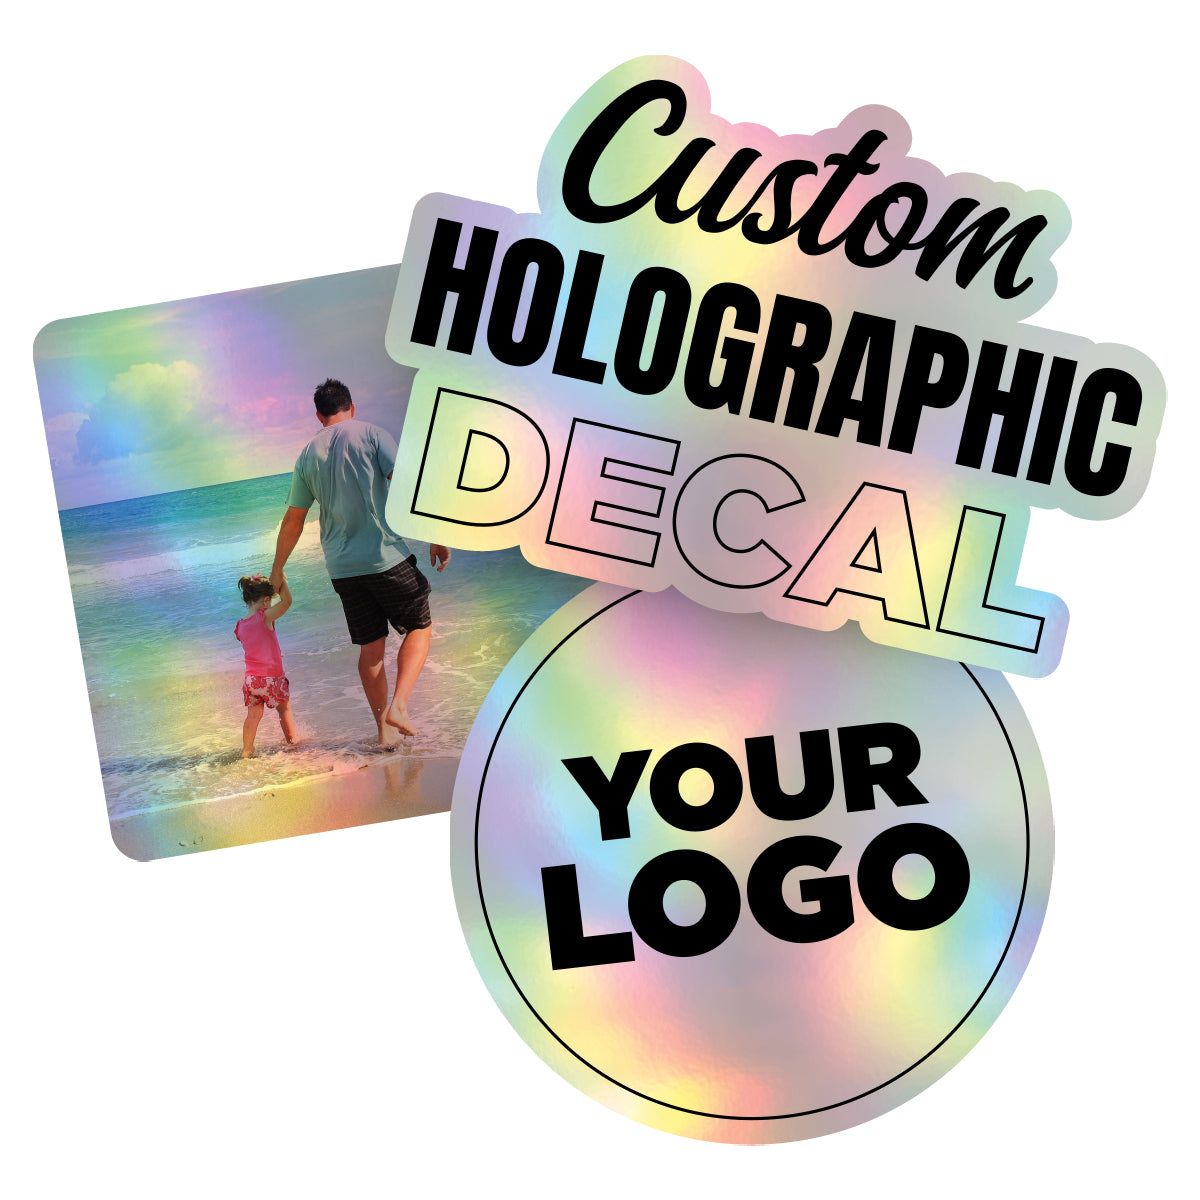 Personalized Holographic Vinyl Sticker Decal Custom Made Any Logo, Image, Text, Or Name Die Cut To Shape - 50 Pack, 6 Inch, Circle